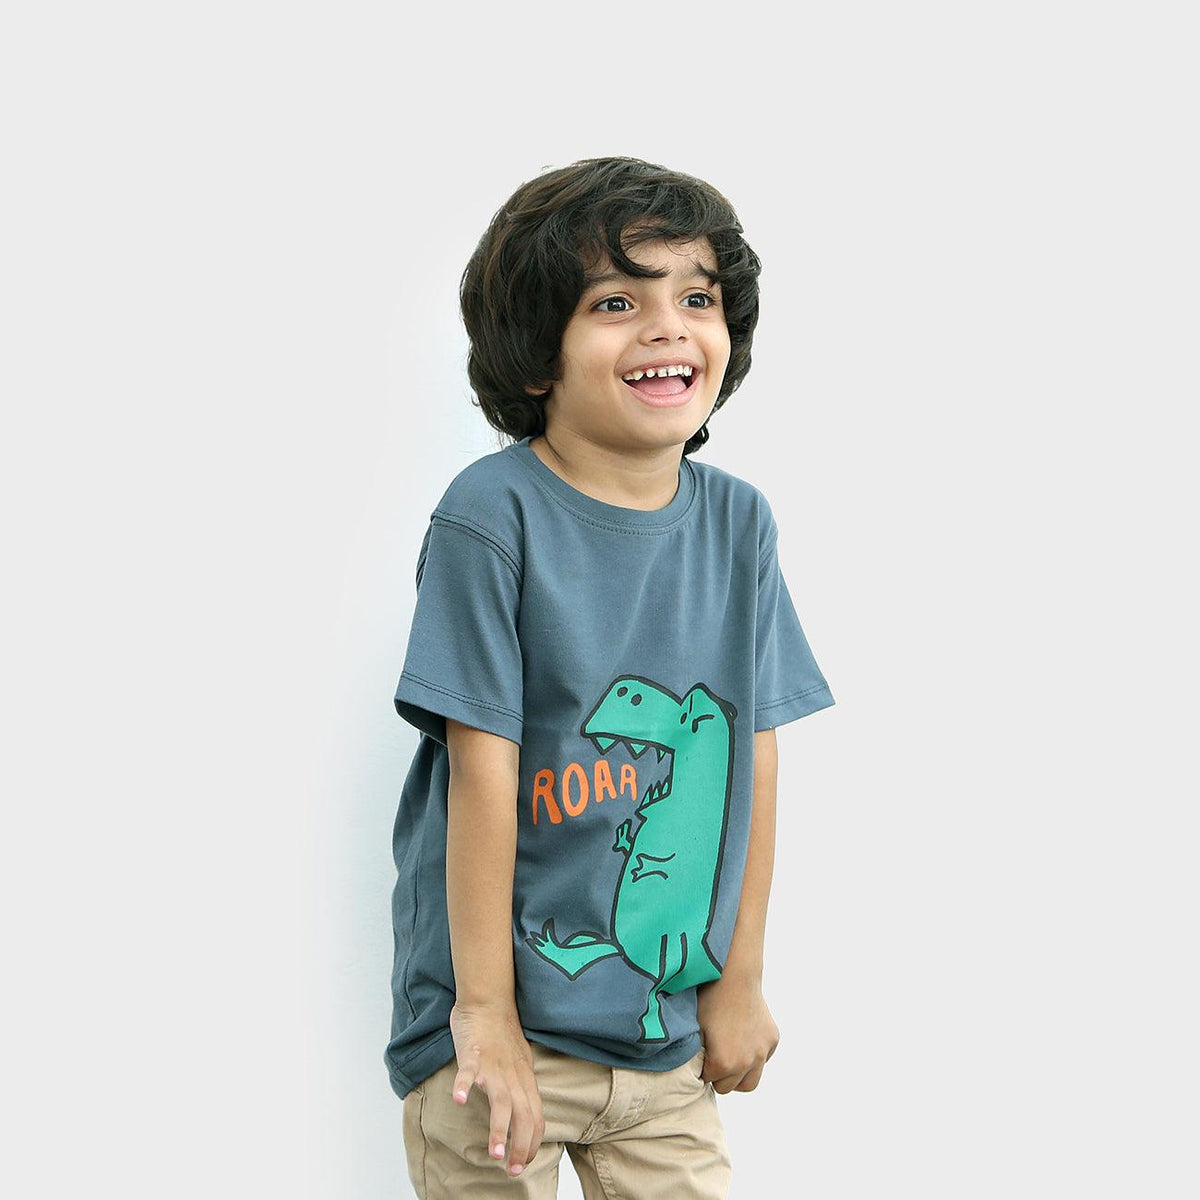 Boys Animated Printed Soft Cotton T-Shirt 9 MONTH - 10 YRS (MI-11536) - Brands River